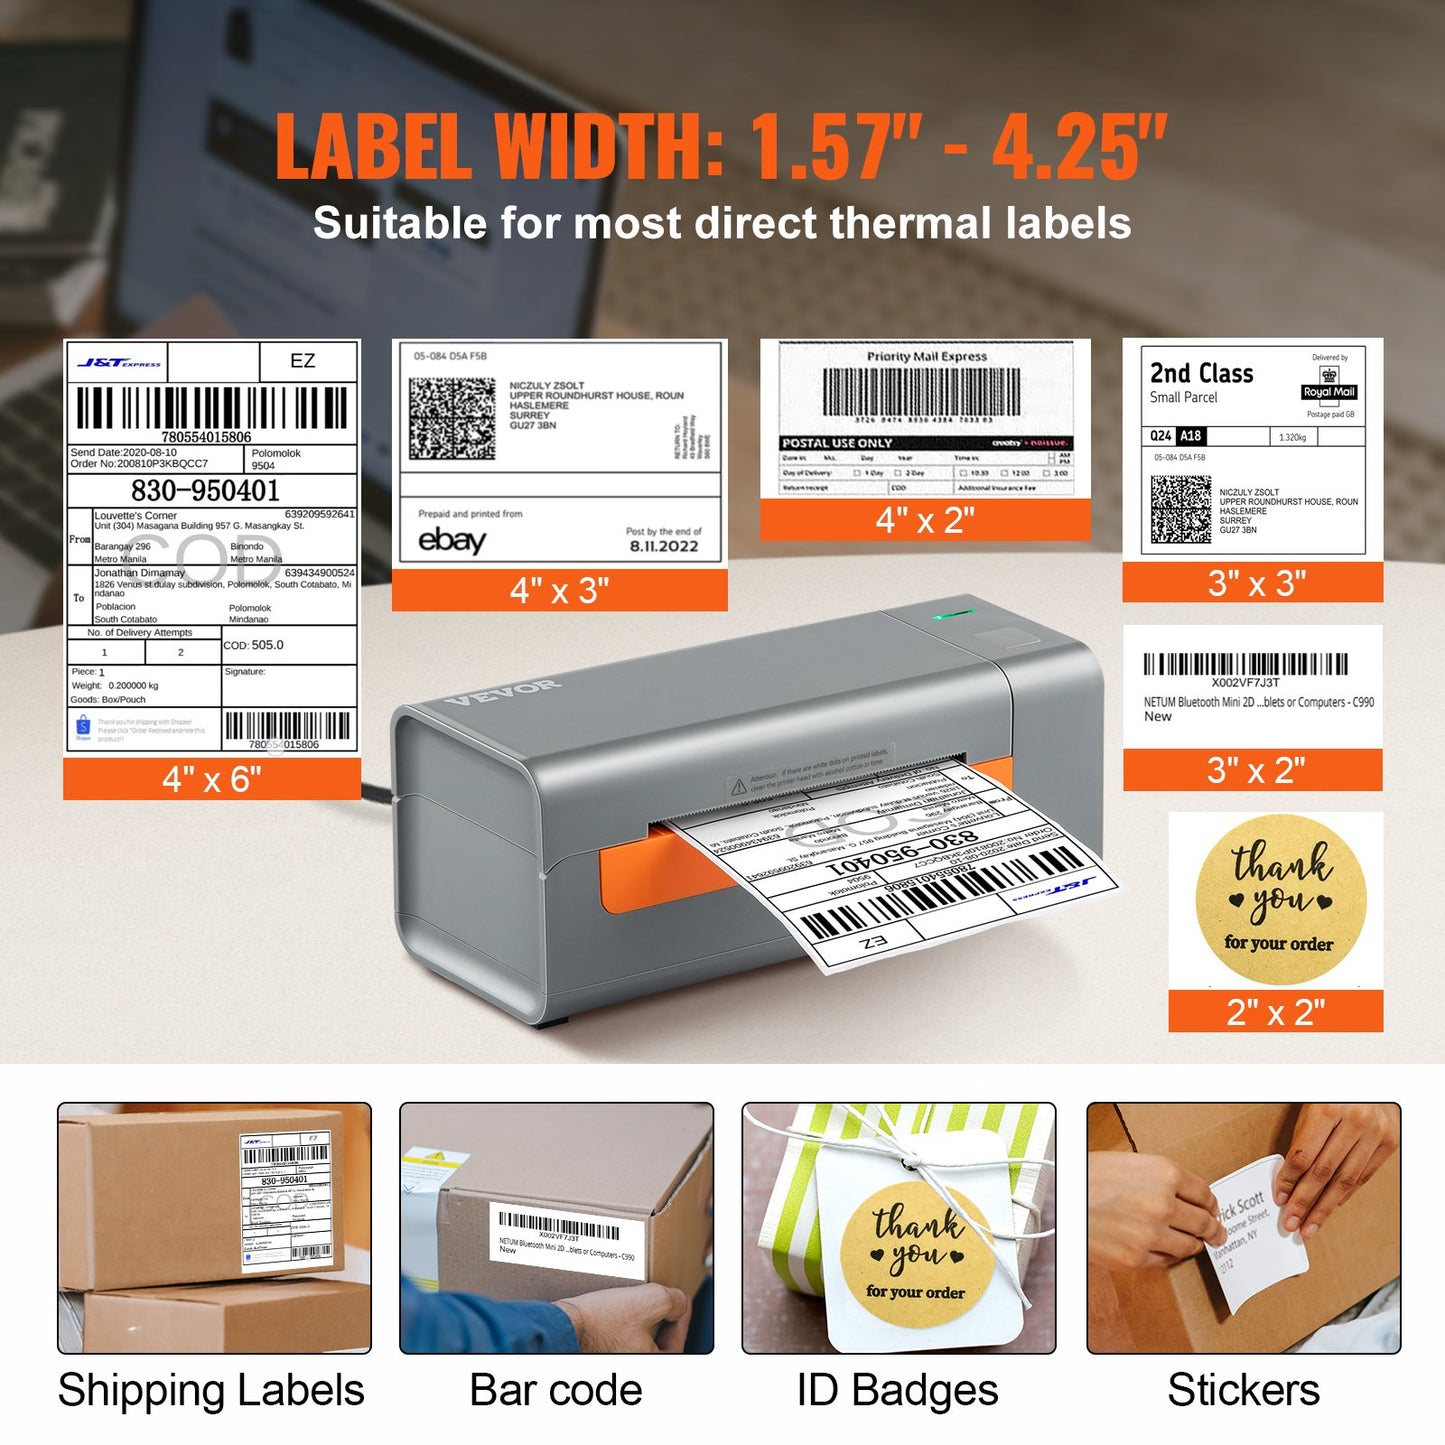 Thermal Label Printer, 203DPI 60pcs/min for 4x6 Mailing Packages, USB Connection & Automatic Label Recognition, Support Windows/MacOS/Linux, Compatible with Amazon, eBay, Etsy, UPS,etc, Gray